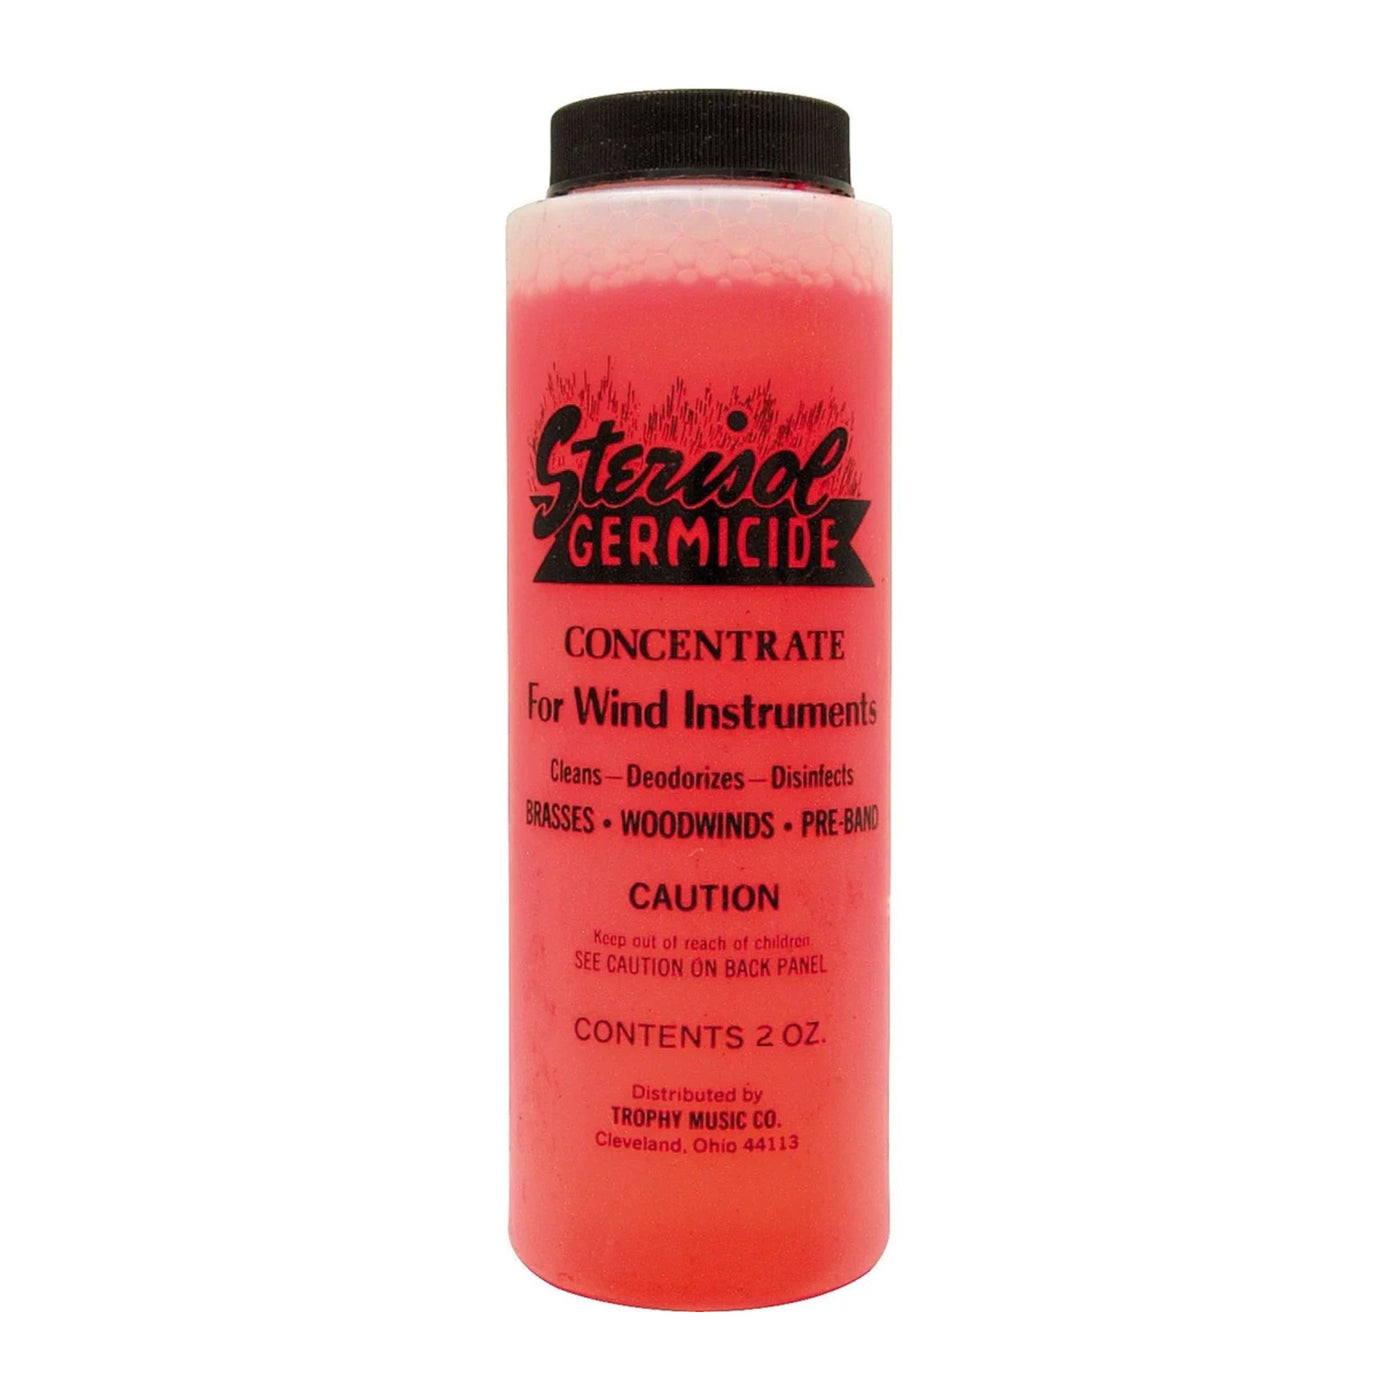 Grover/Trophy Sterisol Germicide Concentrate for Wind Instruments